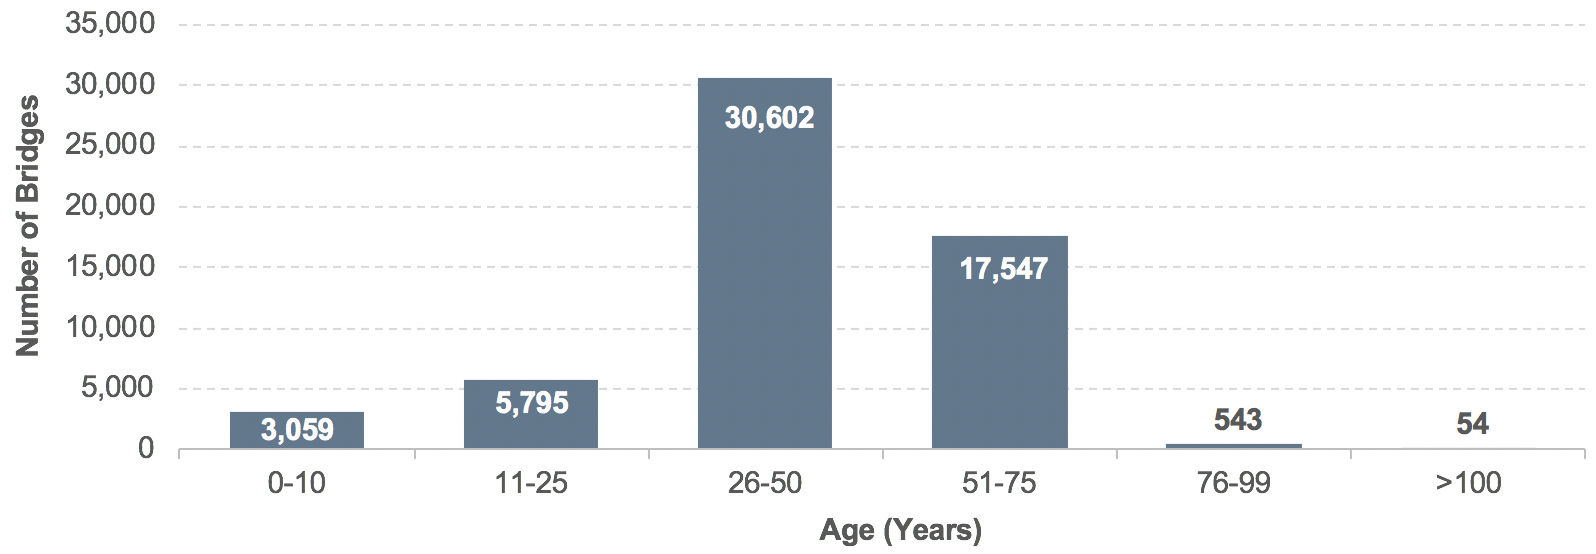 This bar chart shows the number of bridges on the NHFN organized by age group. There are many bridges between the ages of 25 and 75, and fewer bridges that are either very old or very new. The largest number of bridges (30,602) are 25-50 years old. The second largest number of bridges (17,547) are 51-75 years old. The smallest number of bridges (54) are greater than 100 years old.